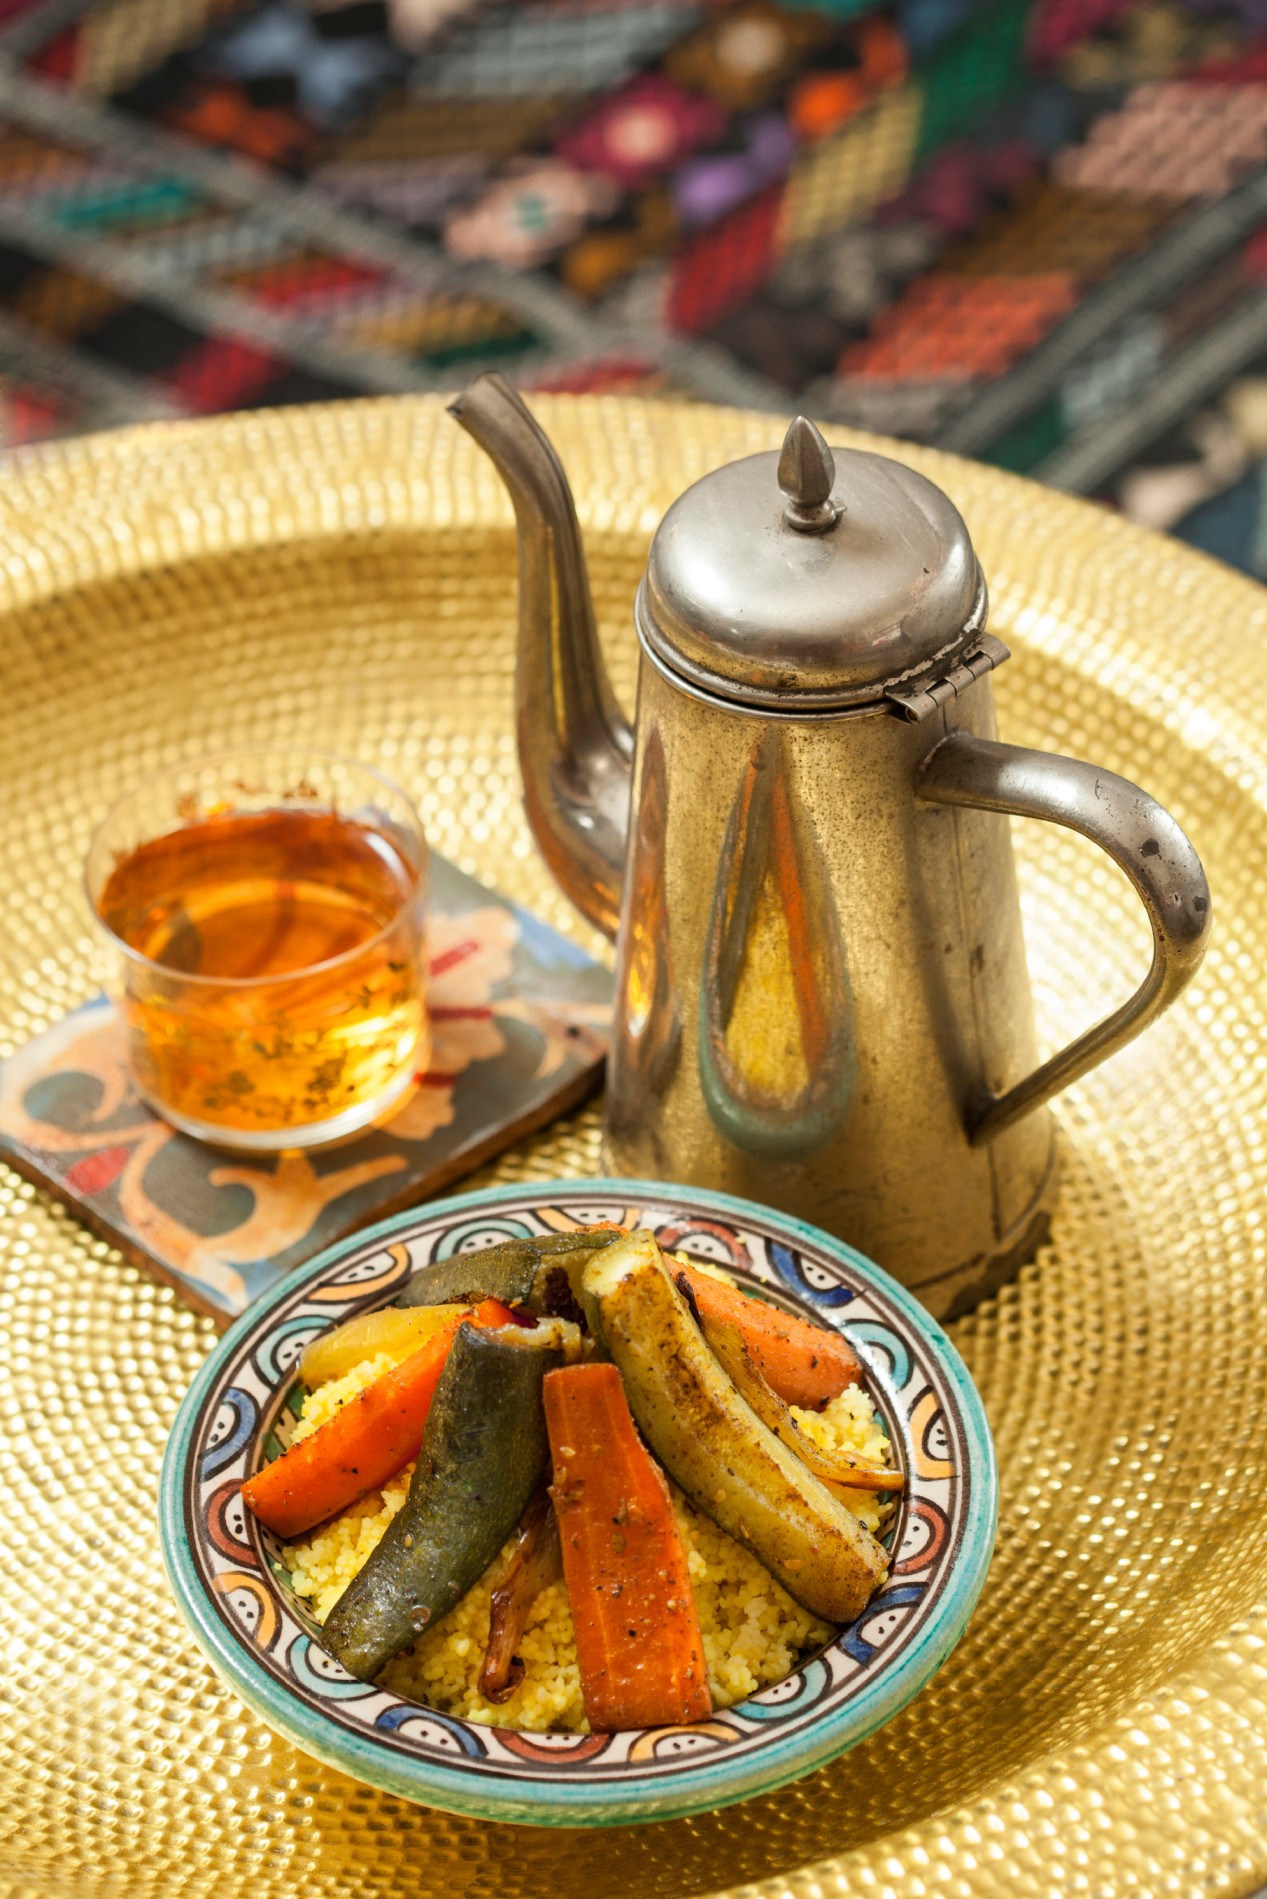 Cuisine traditionnelle marocaine.